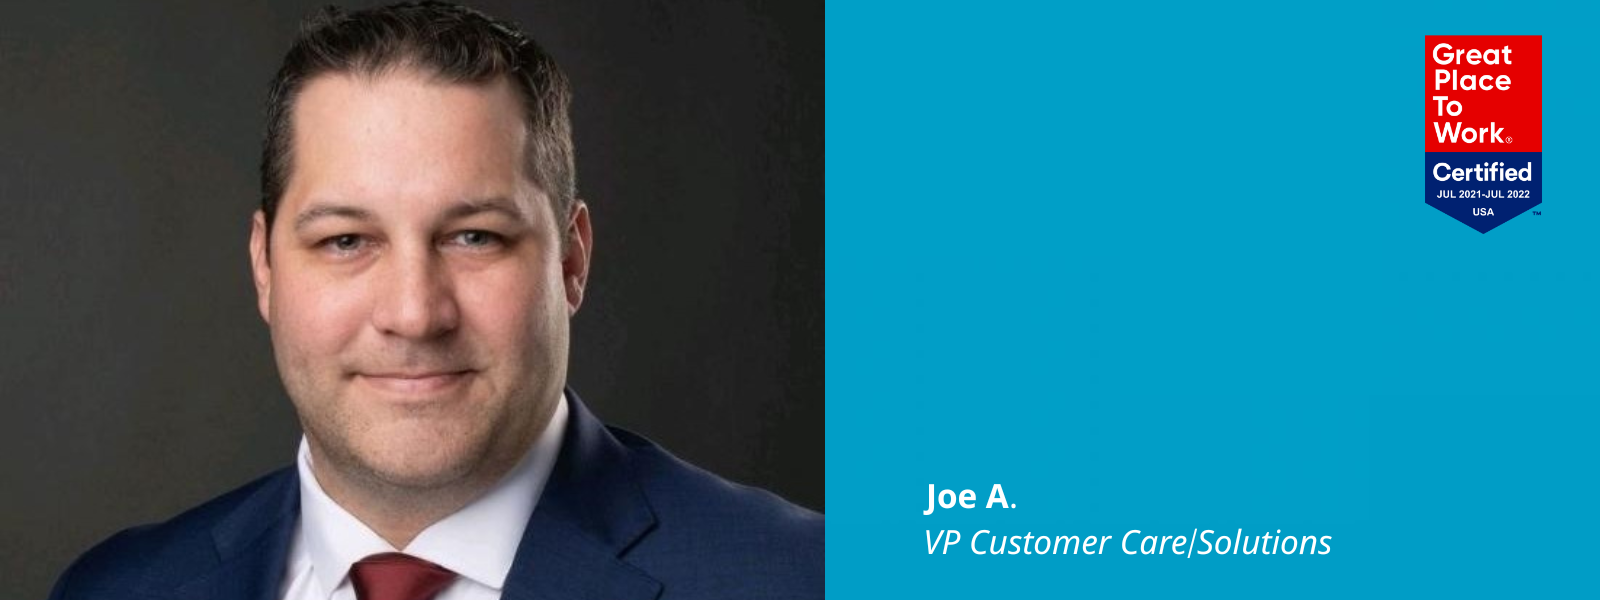 Graphic that inclues a photo of Joe A. next to a blue graphical box with text: "Joe A. VP Customer Care/Solutions." The box has a "Great Place To Work Certified" logo in its top right corner for July 2021-July 2022 in the USA.